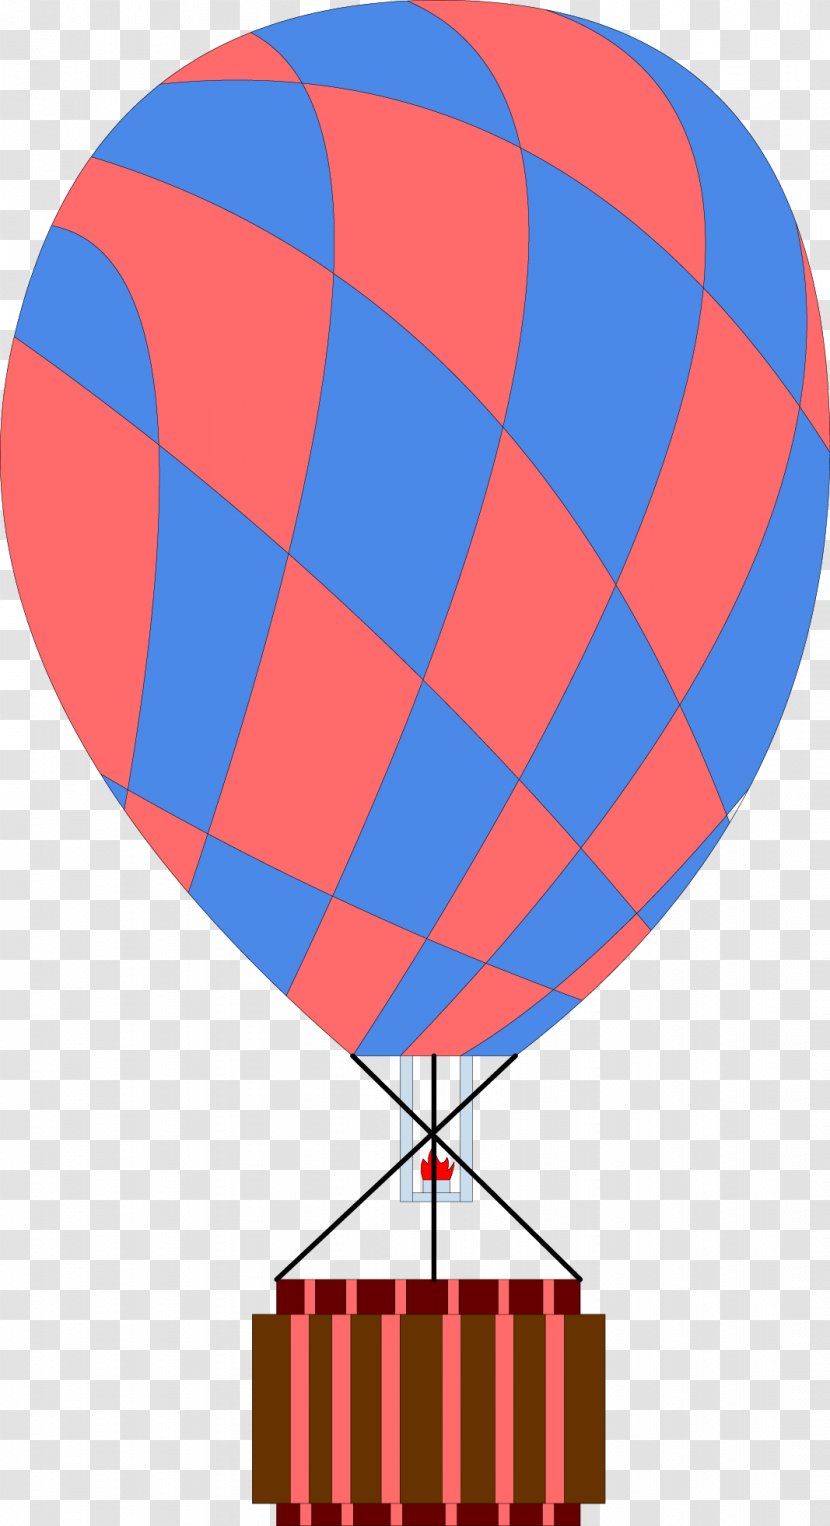 Hot Air Balloon Atmosphere Of Earth Basket Transparent PNG